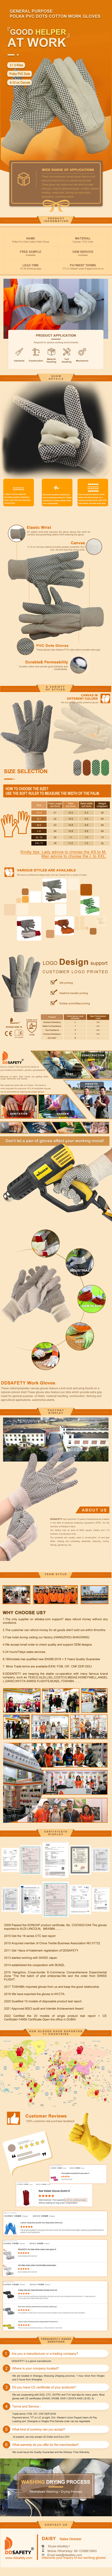 PVC Dotted Cotton Canvas Safety Work Gloves - DCD203 PVC Dotted Cotton Canvas Safety Work Gloves - DCD203 gloves,Dotted Canvas Gloves,work gloves,Canvas Work Gloves